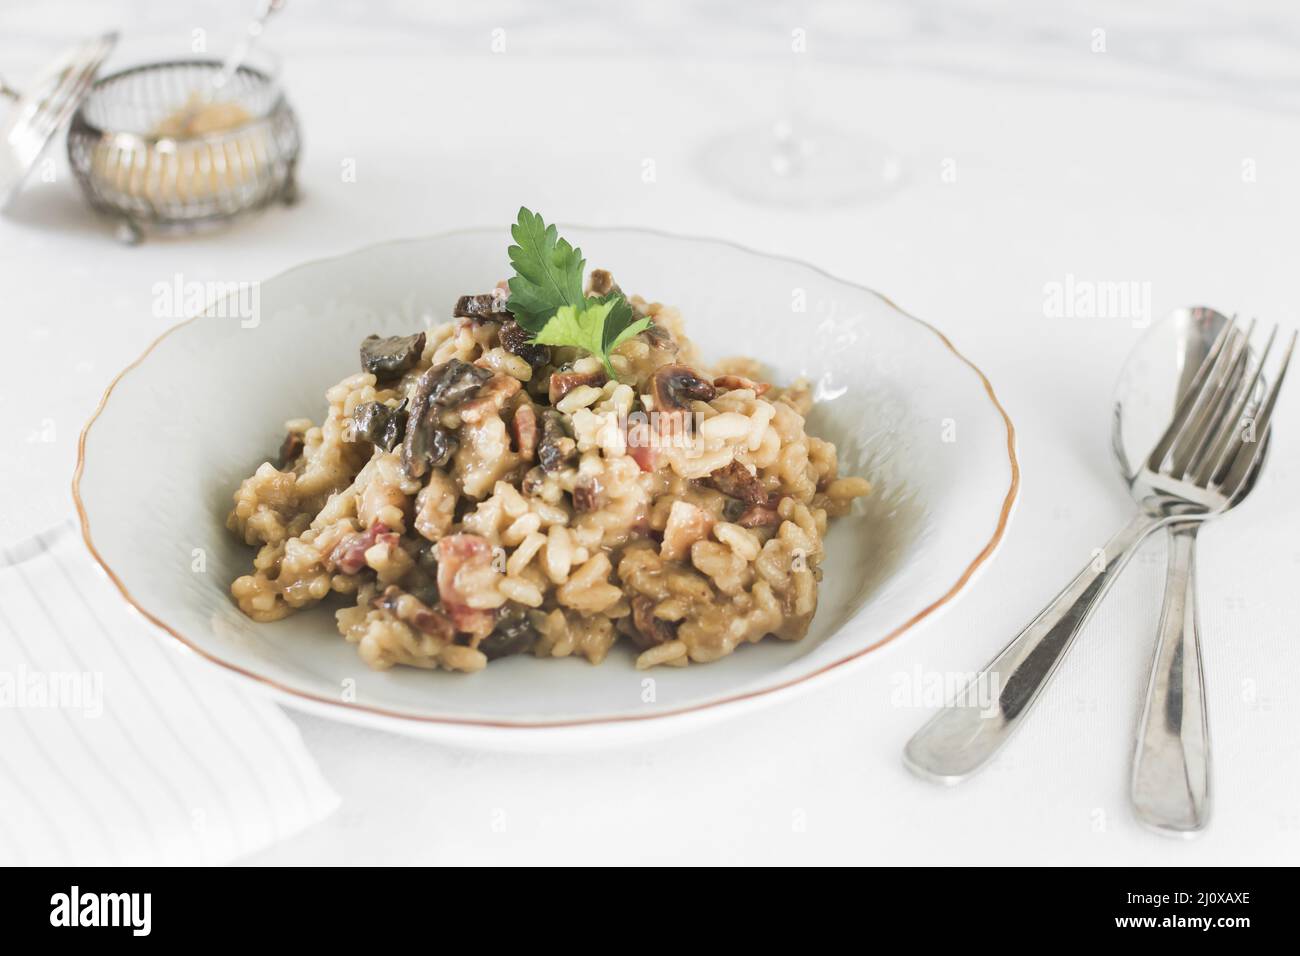 Risotto rice with mushrooms white ceramic plate Stock Photo